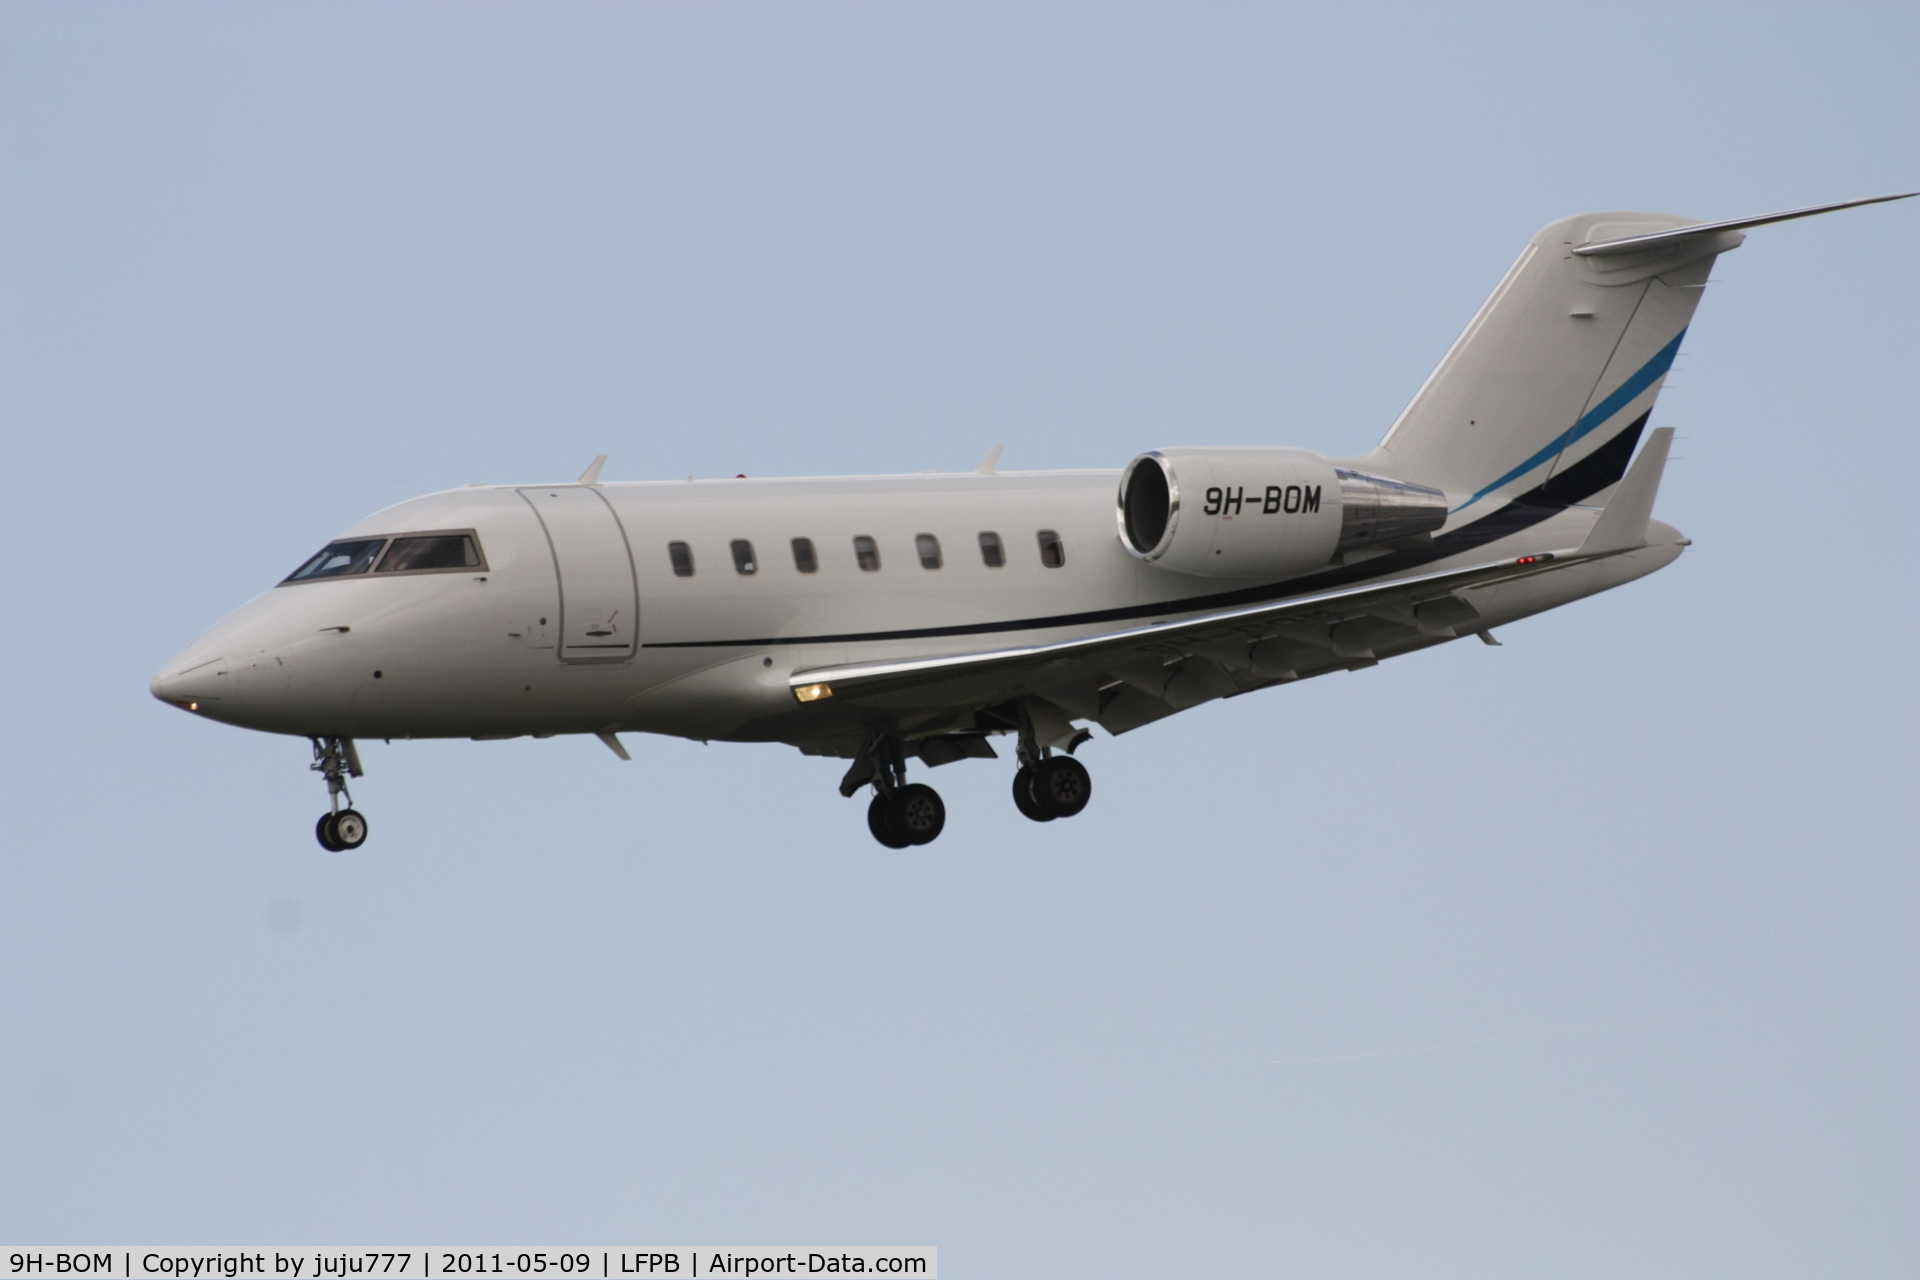 9H-BOM, 2009 Bombardier Challenger 605 (CL-600-2B16) C/N 5785, on transit at Le Bourget